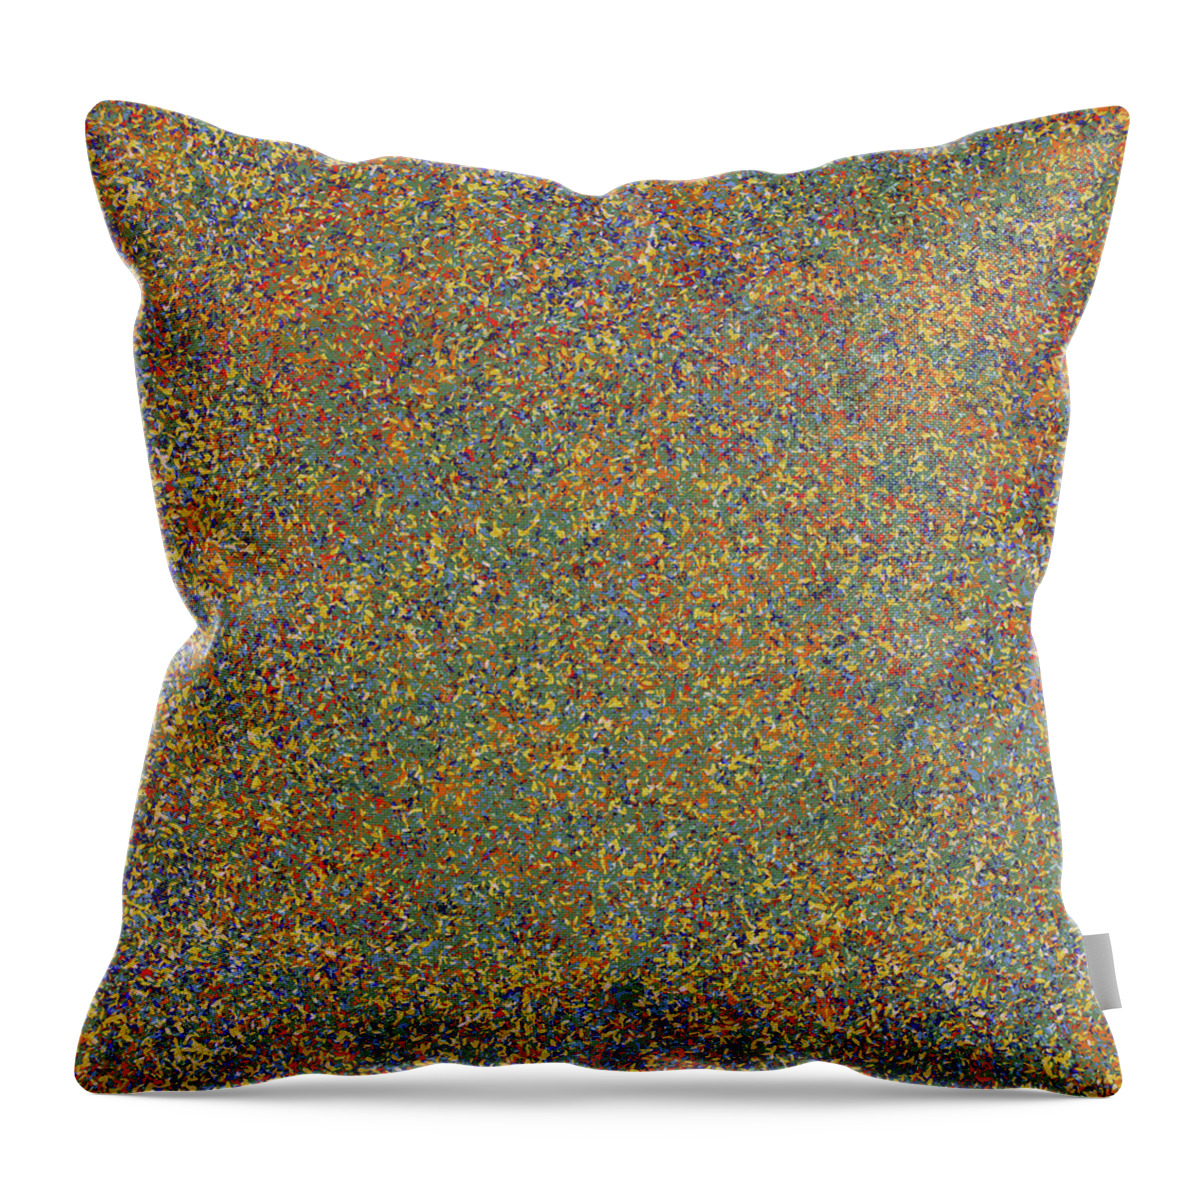 Blues Throw Pillow featuring the digital art Droplets of Colour by Andrew Penman